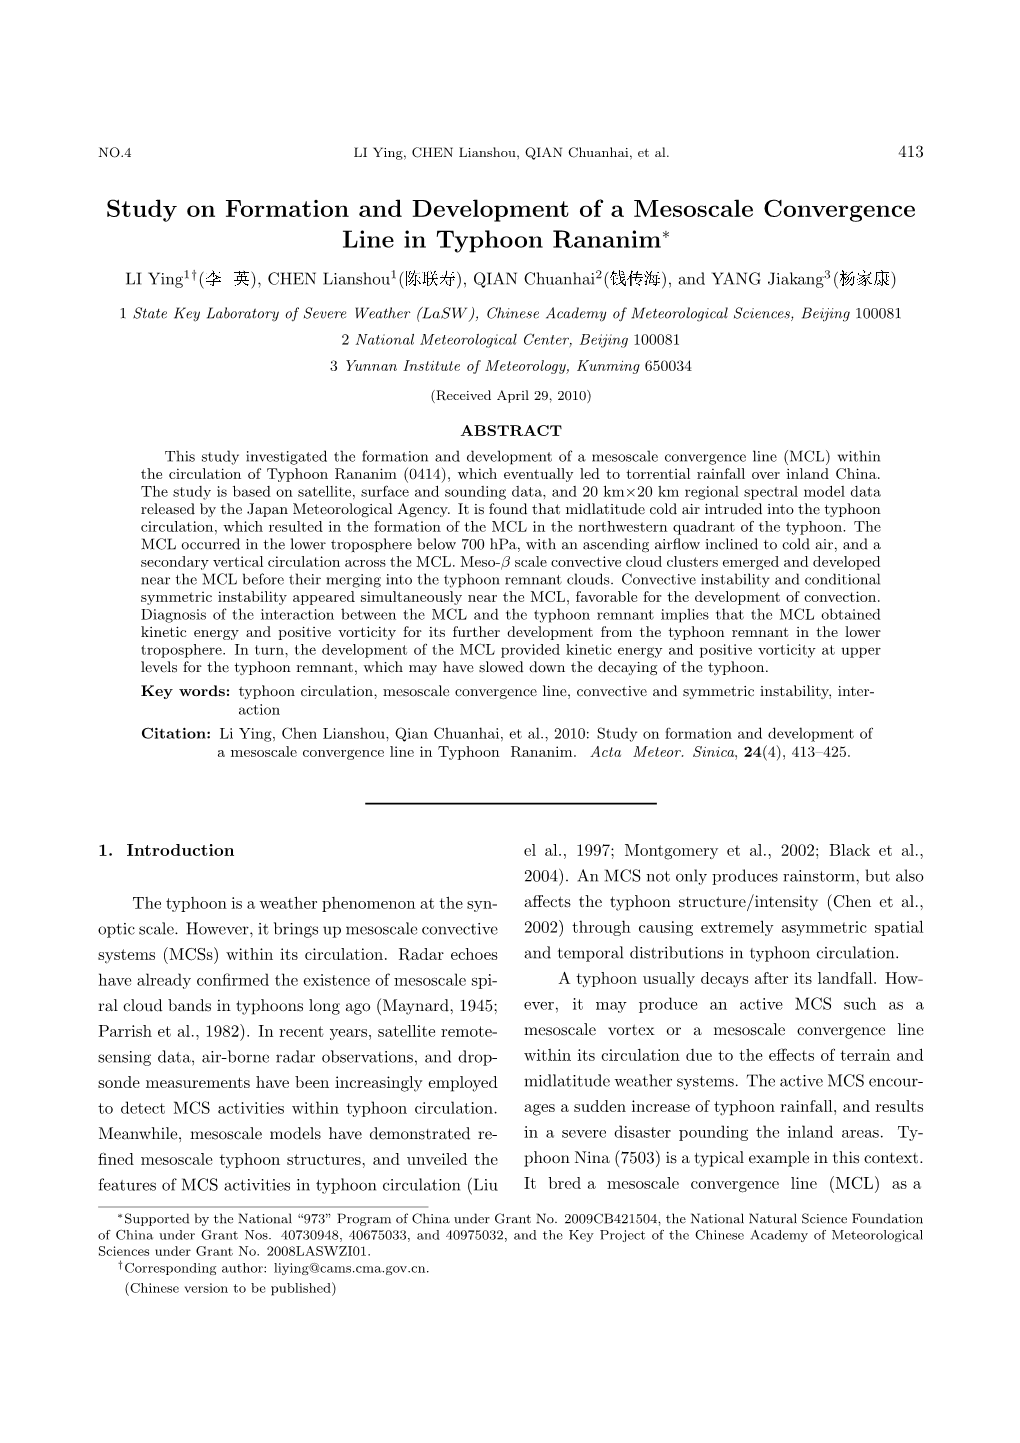 Study on Formation and Development of a Mesoscale Convergence Line in Typhoon Rananim∗